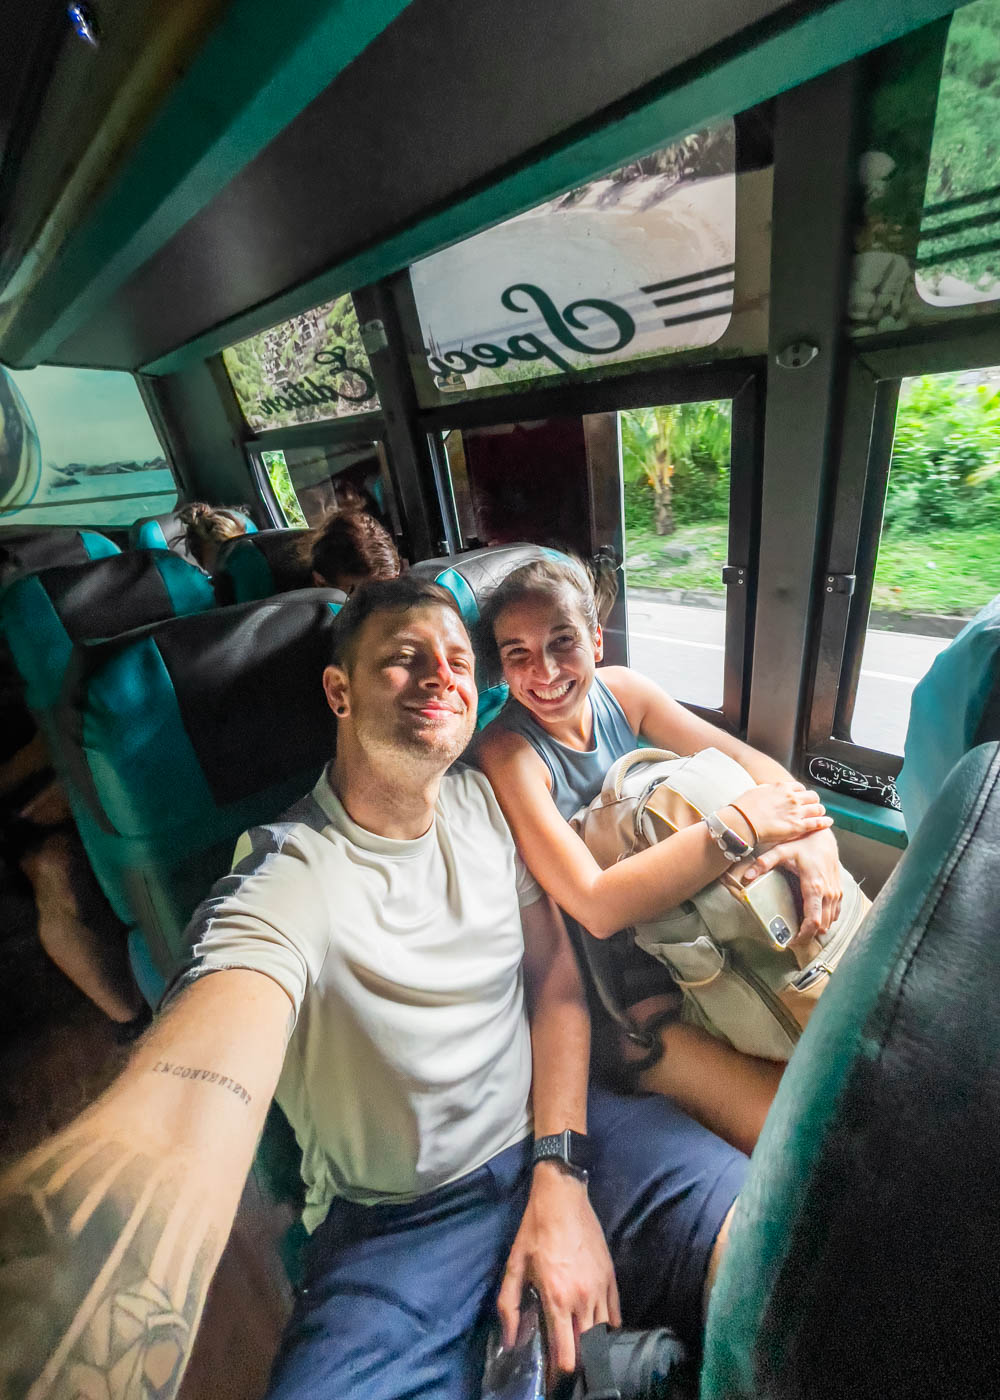 Ryan and Sara wearing hiking gear and taking a selfie on the pubic bus.